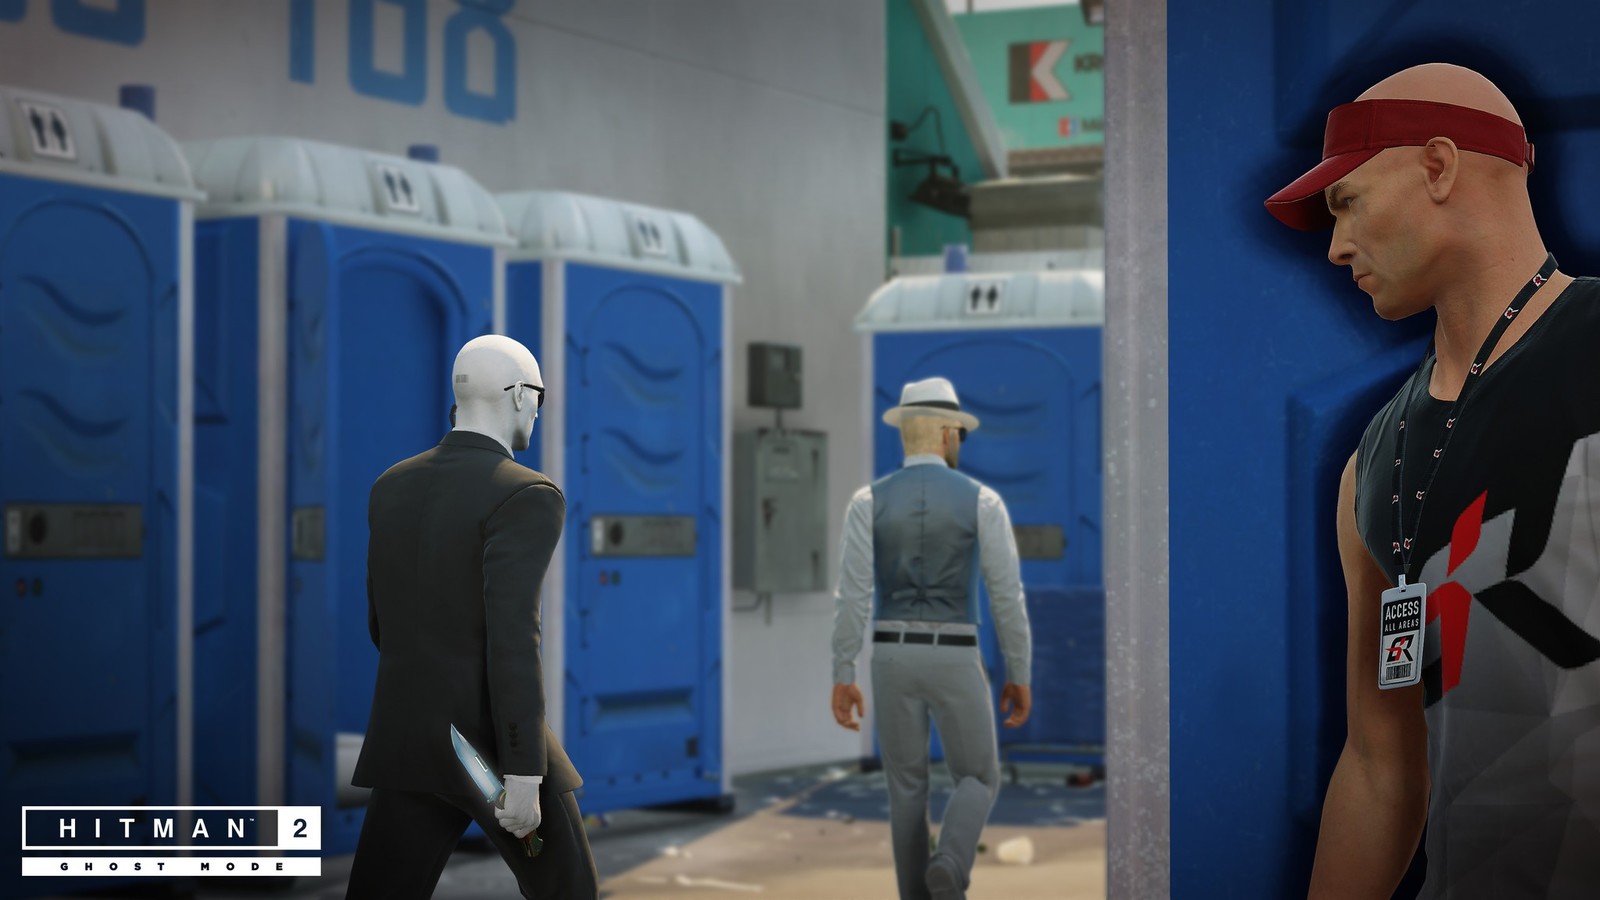 Hitman 2 will have a new competitive 1v1